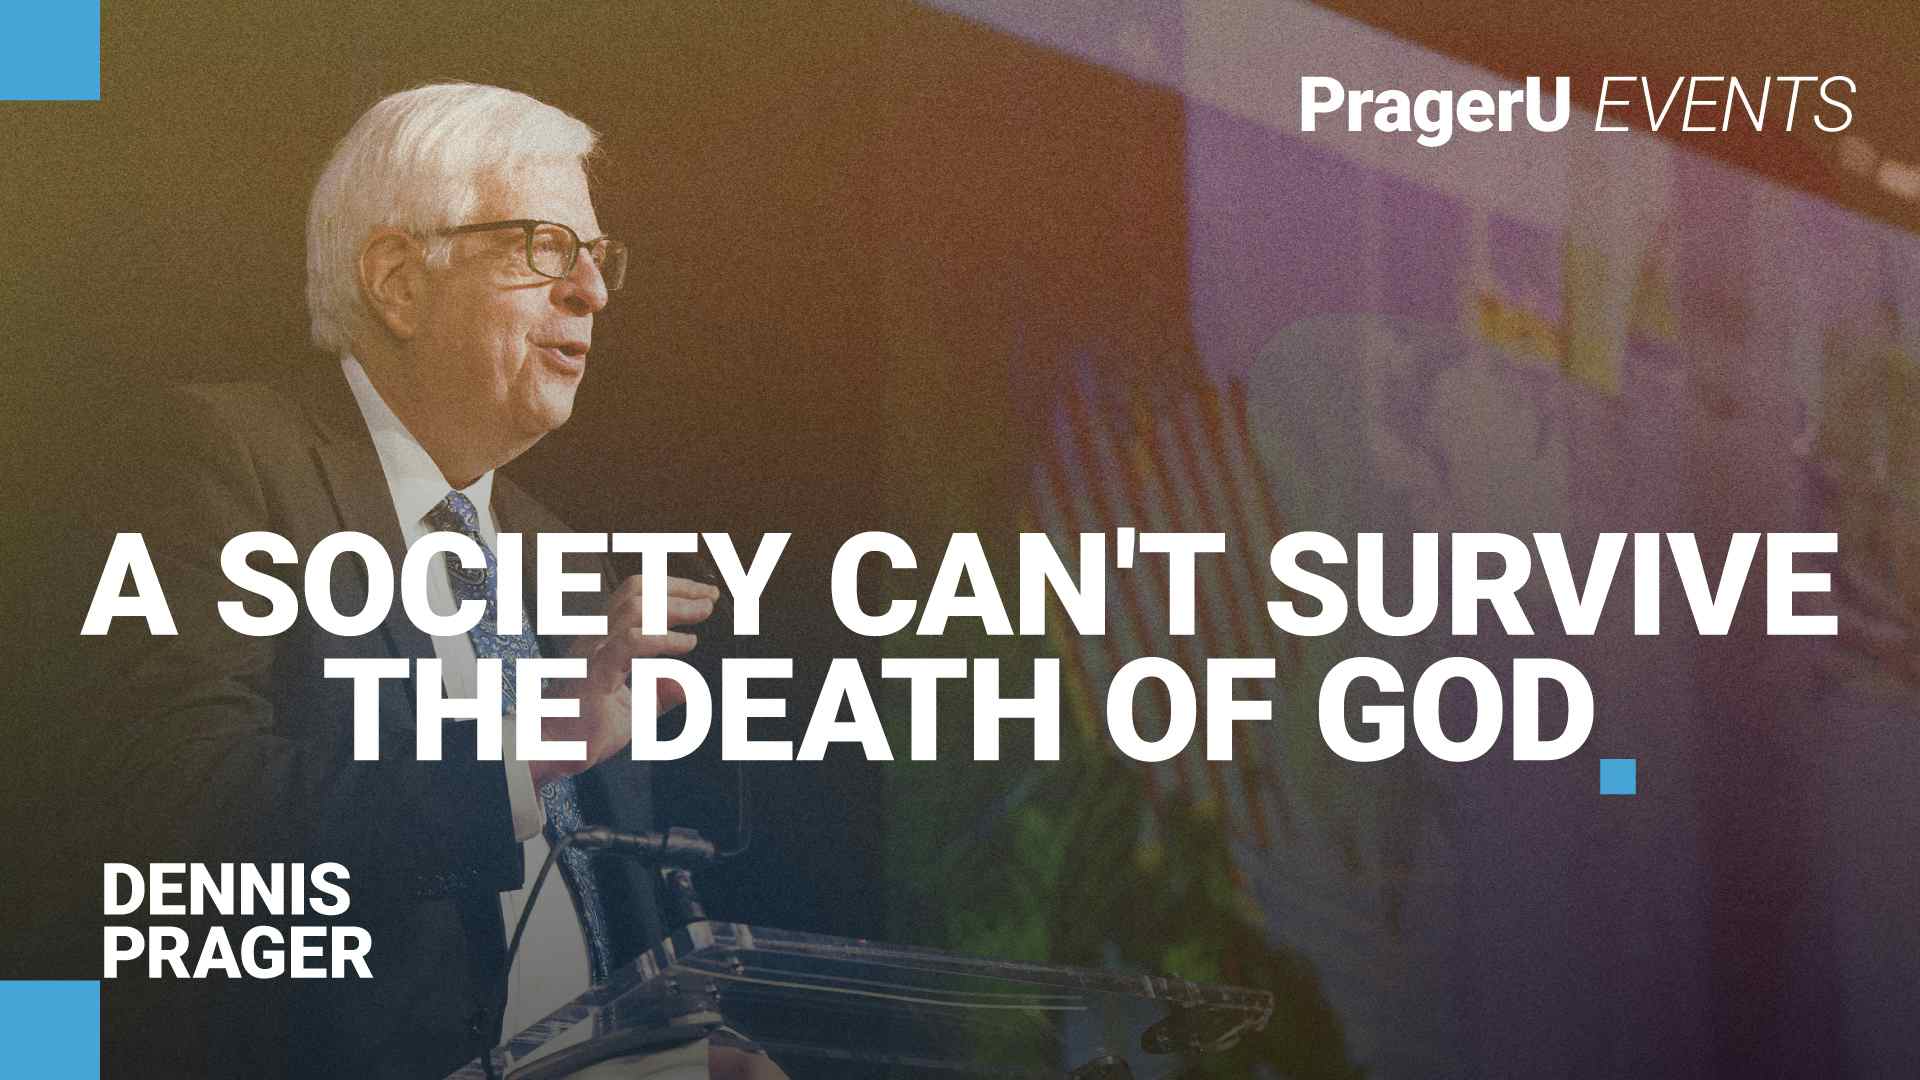 A Society Can't Survive the Death of God